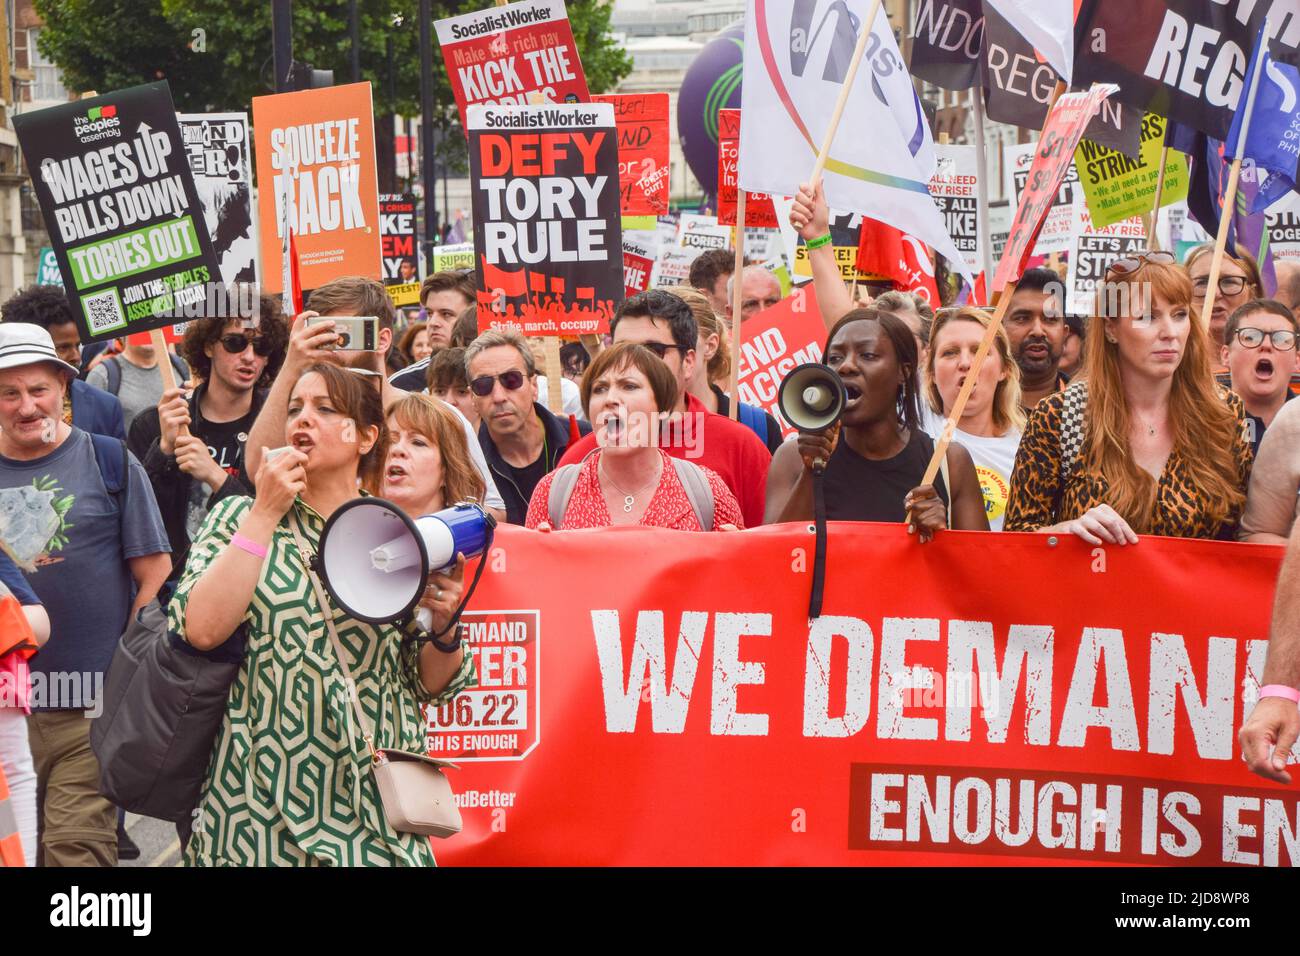 London, UK. 18th June 2022. Labour deputy leader Angela Rayner with protesters in Haymarket. Thousands of people and various trade unions and groups marched through central London in protest against the cost of living crisis, the Tory Government, the Rwanda refugee scheme and other issues. Stock Photo